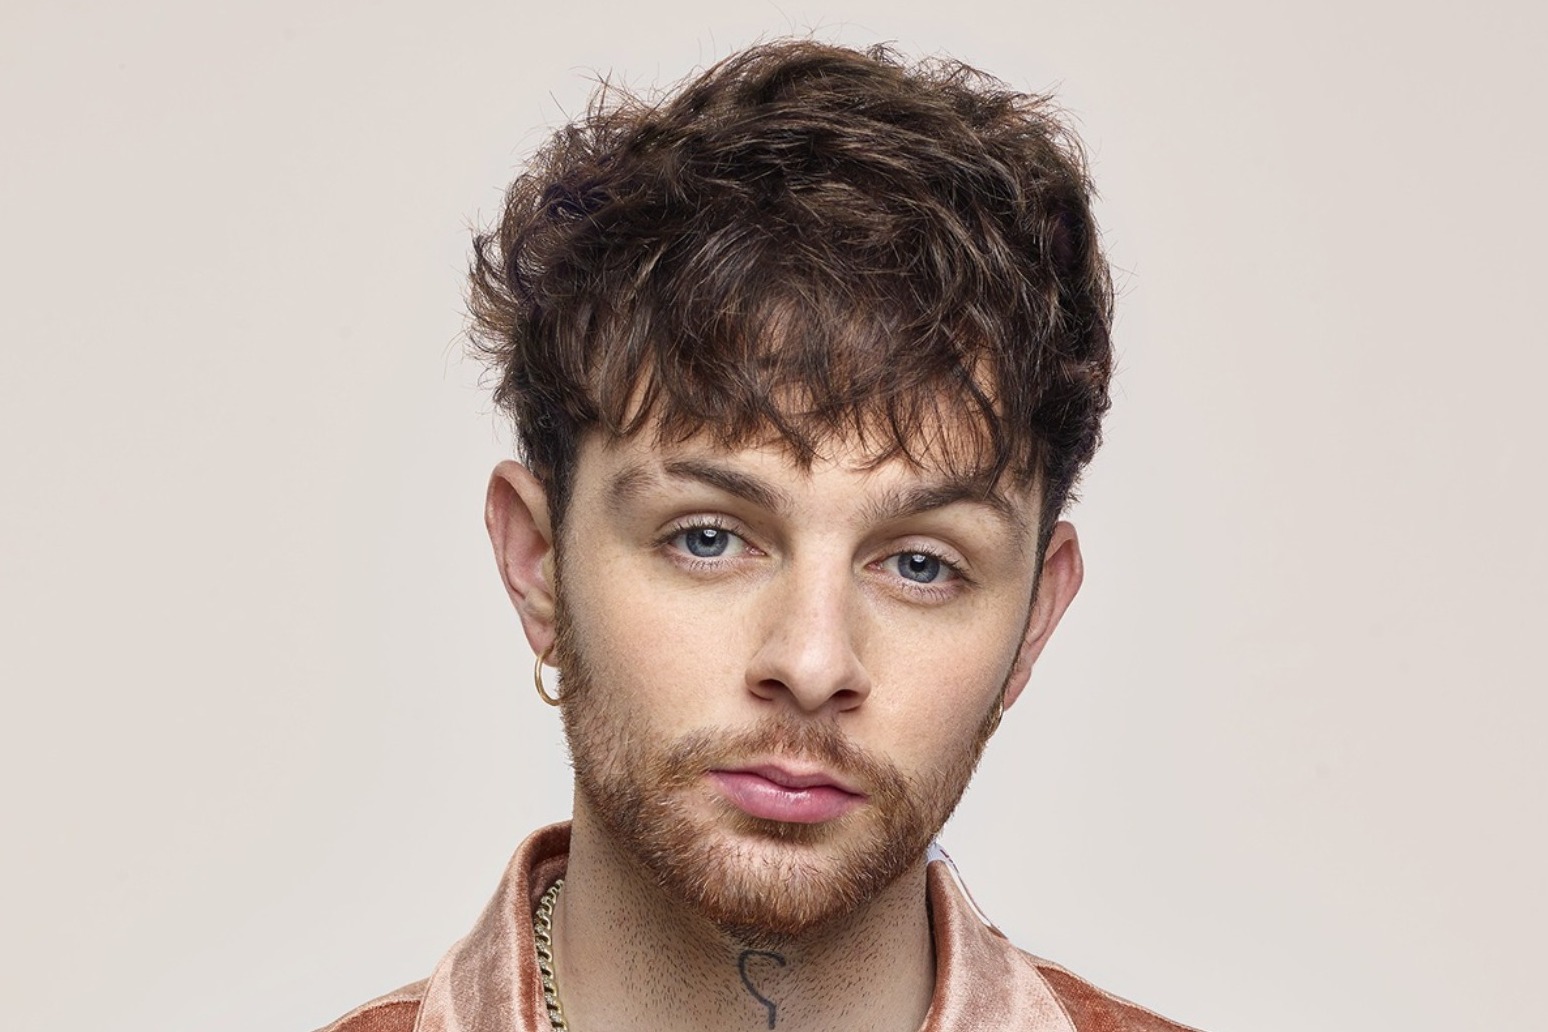 Tom Grennan thanks fans for ‘unbelievable’ support after New York attack 